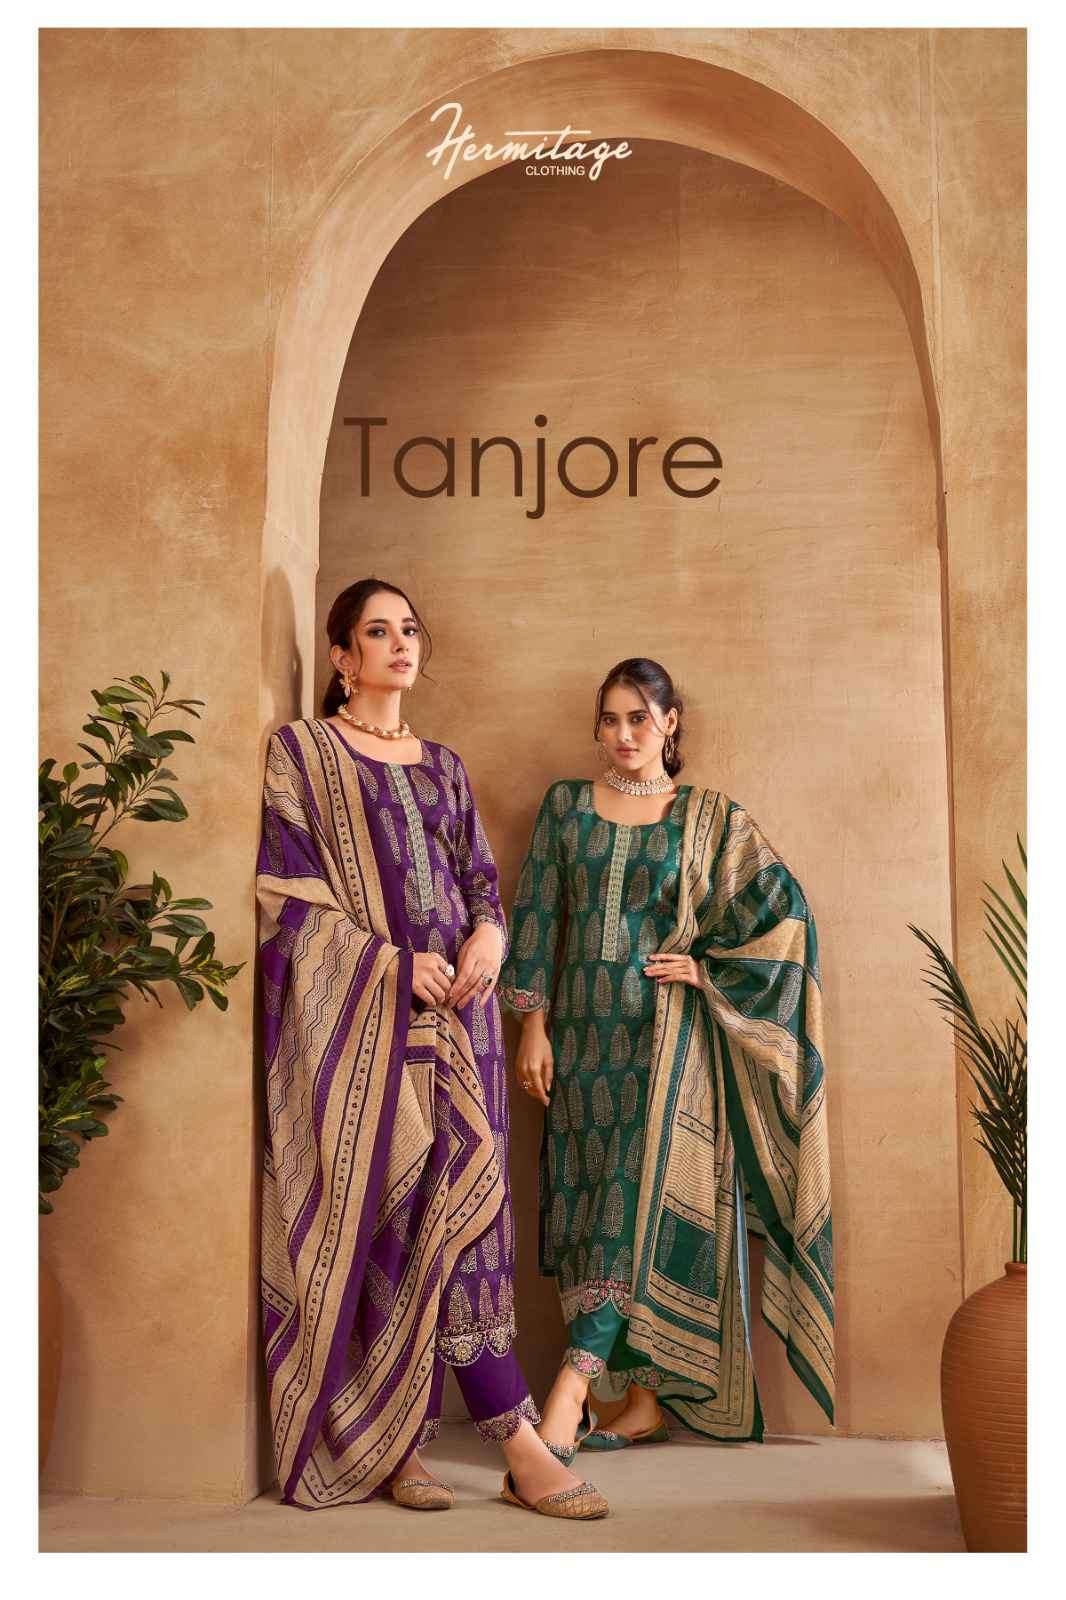 Hermitage Tanjore Fancy Cotton Salwar Kameez New Collection